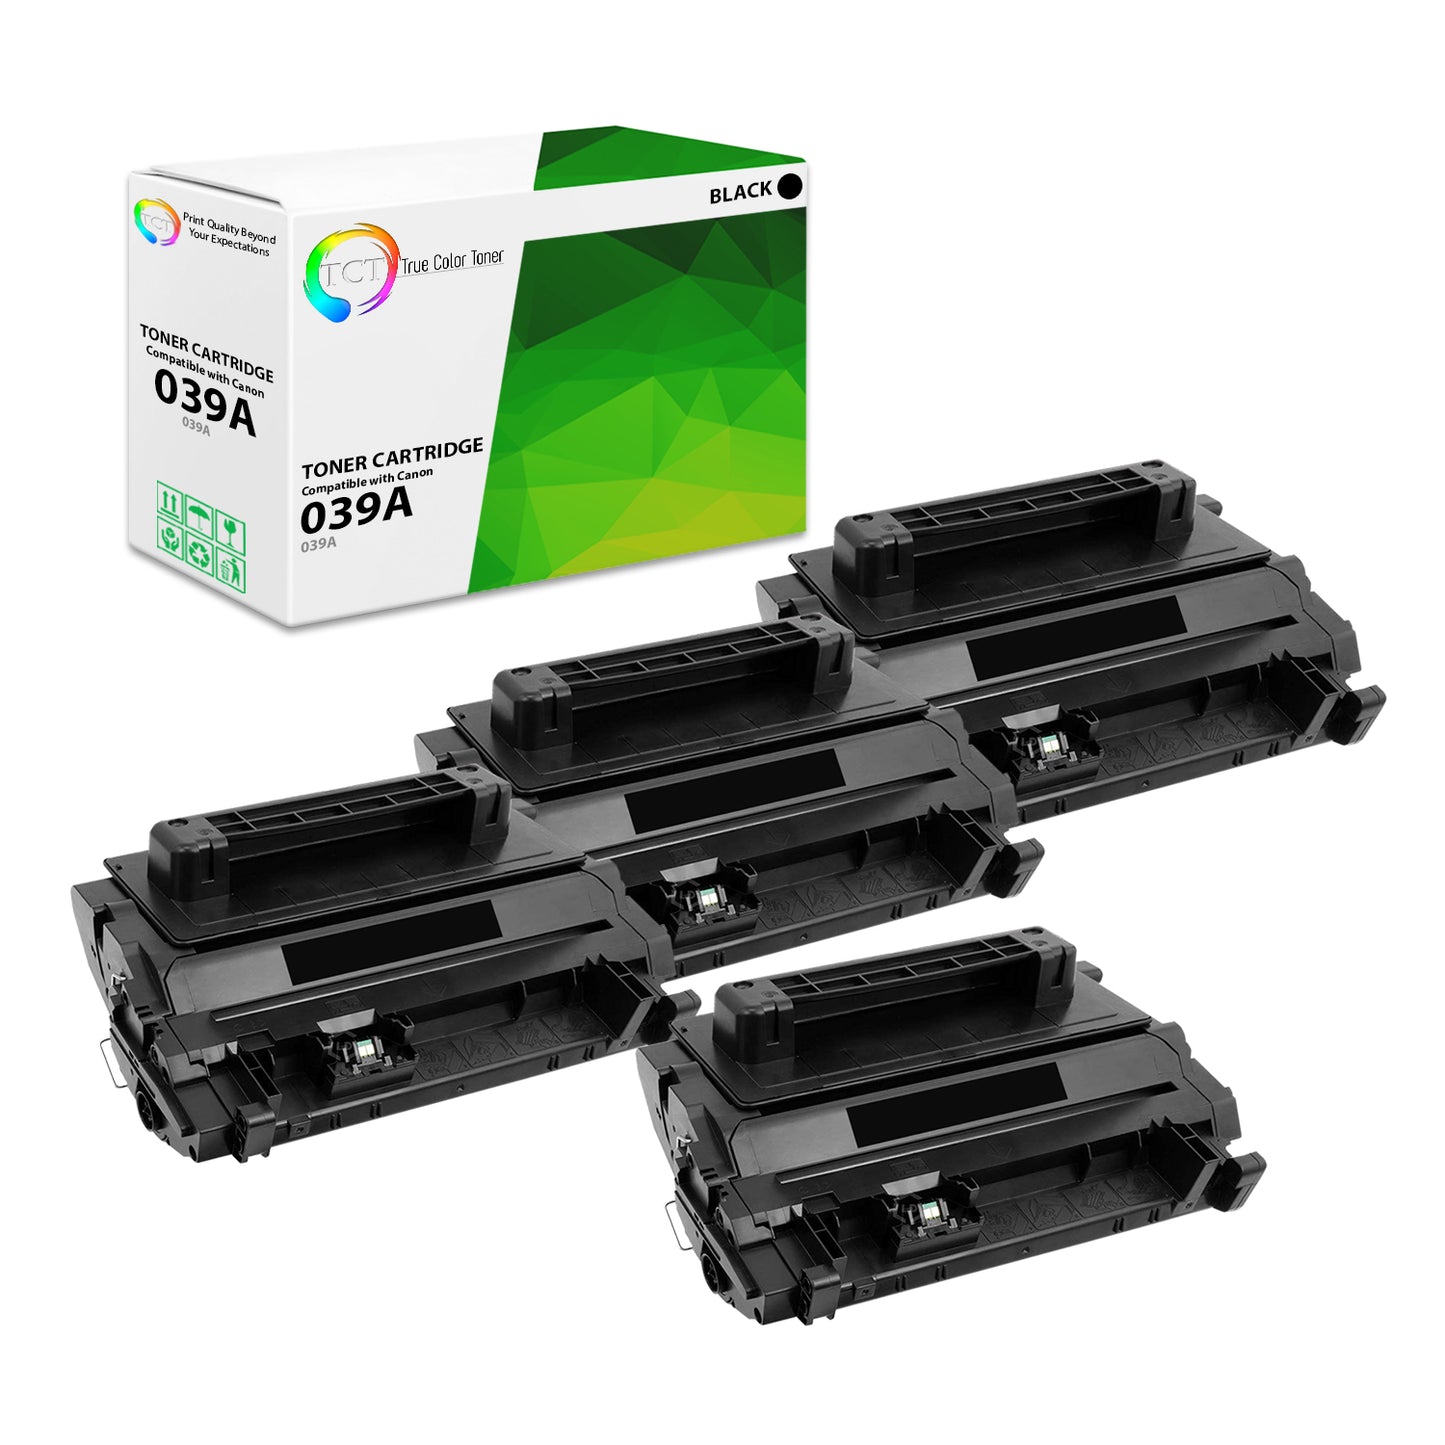 TCT Compatible Toner Cartridge Replacement for the Canon 039 Series - 4 Pack Black